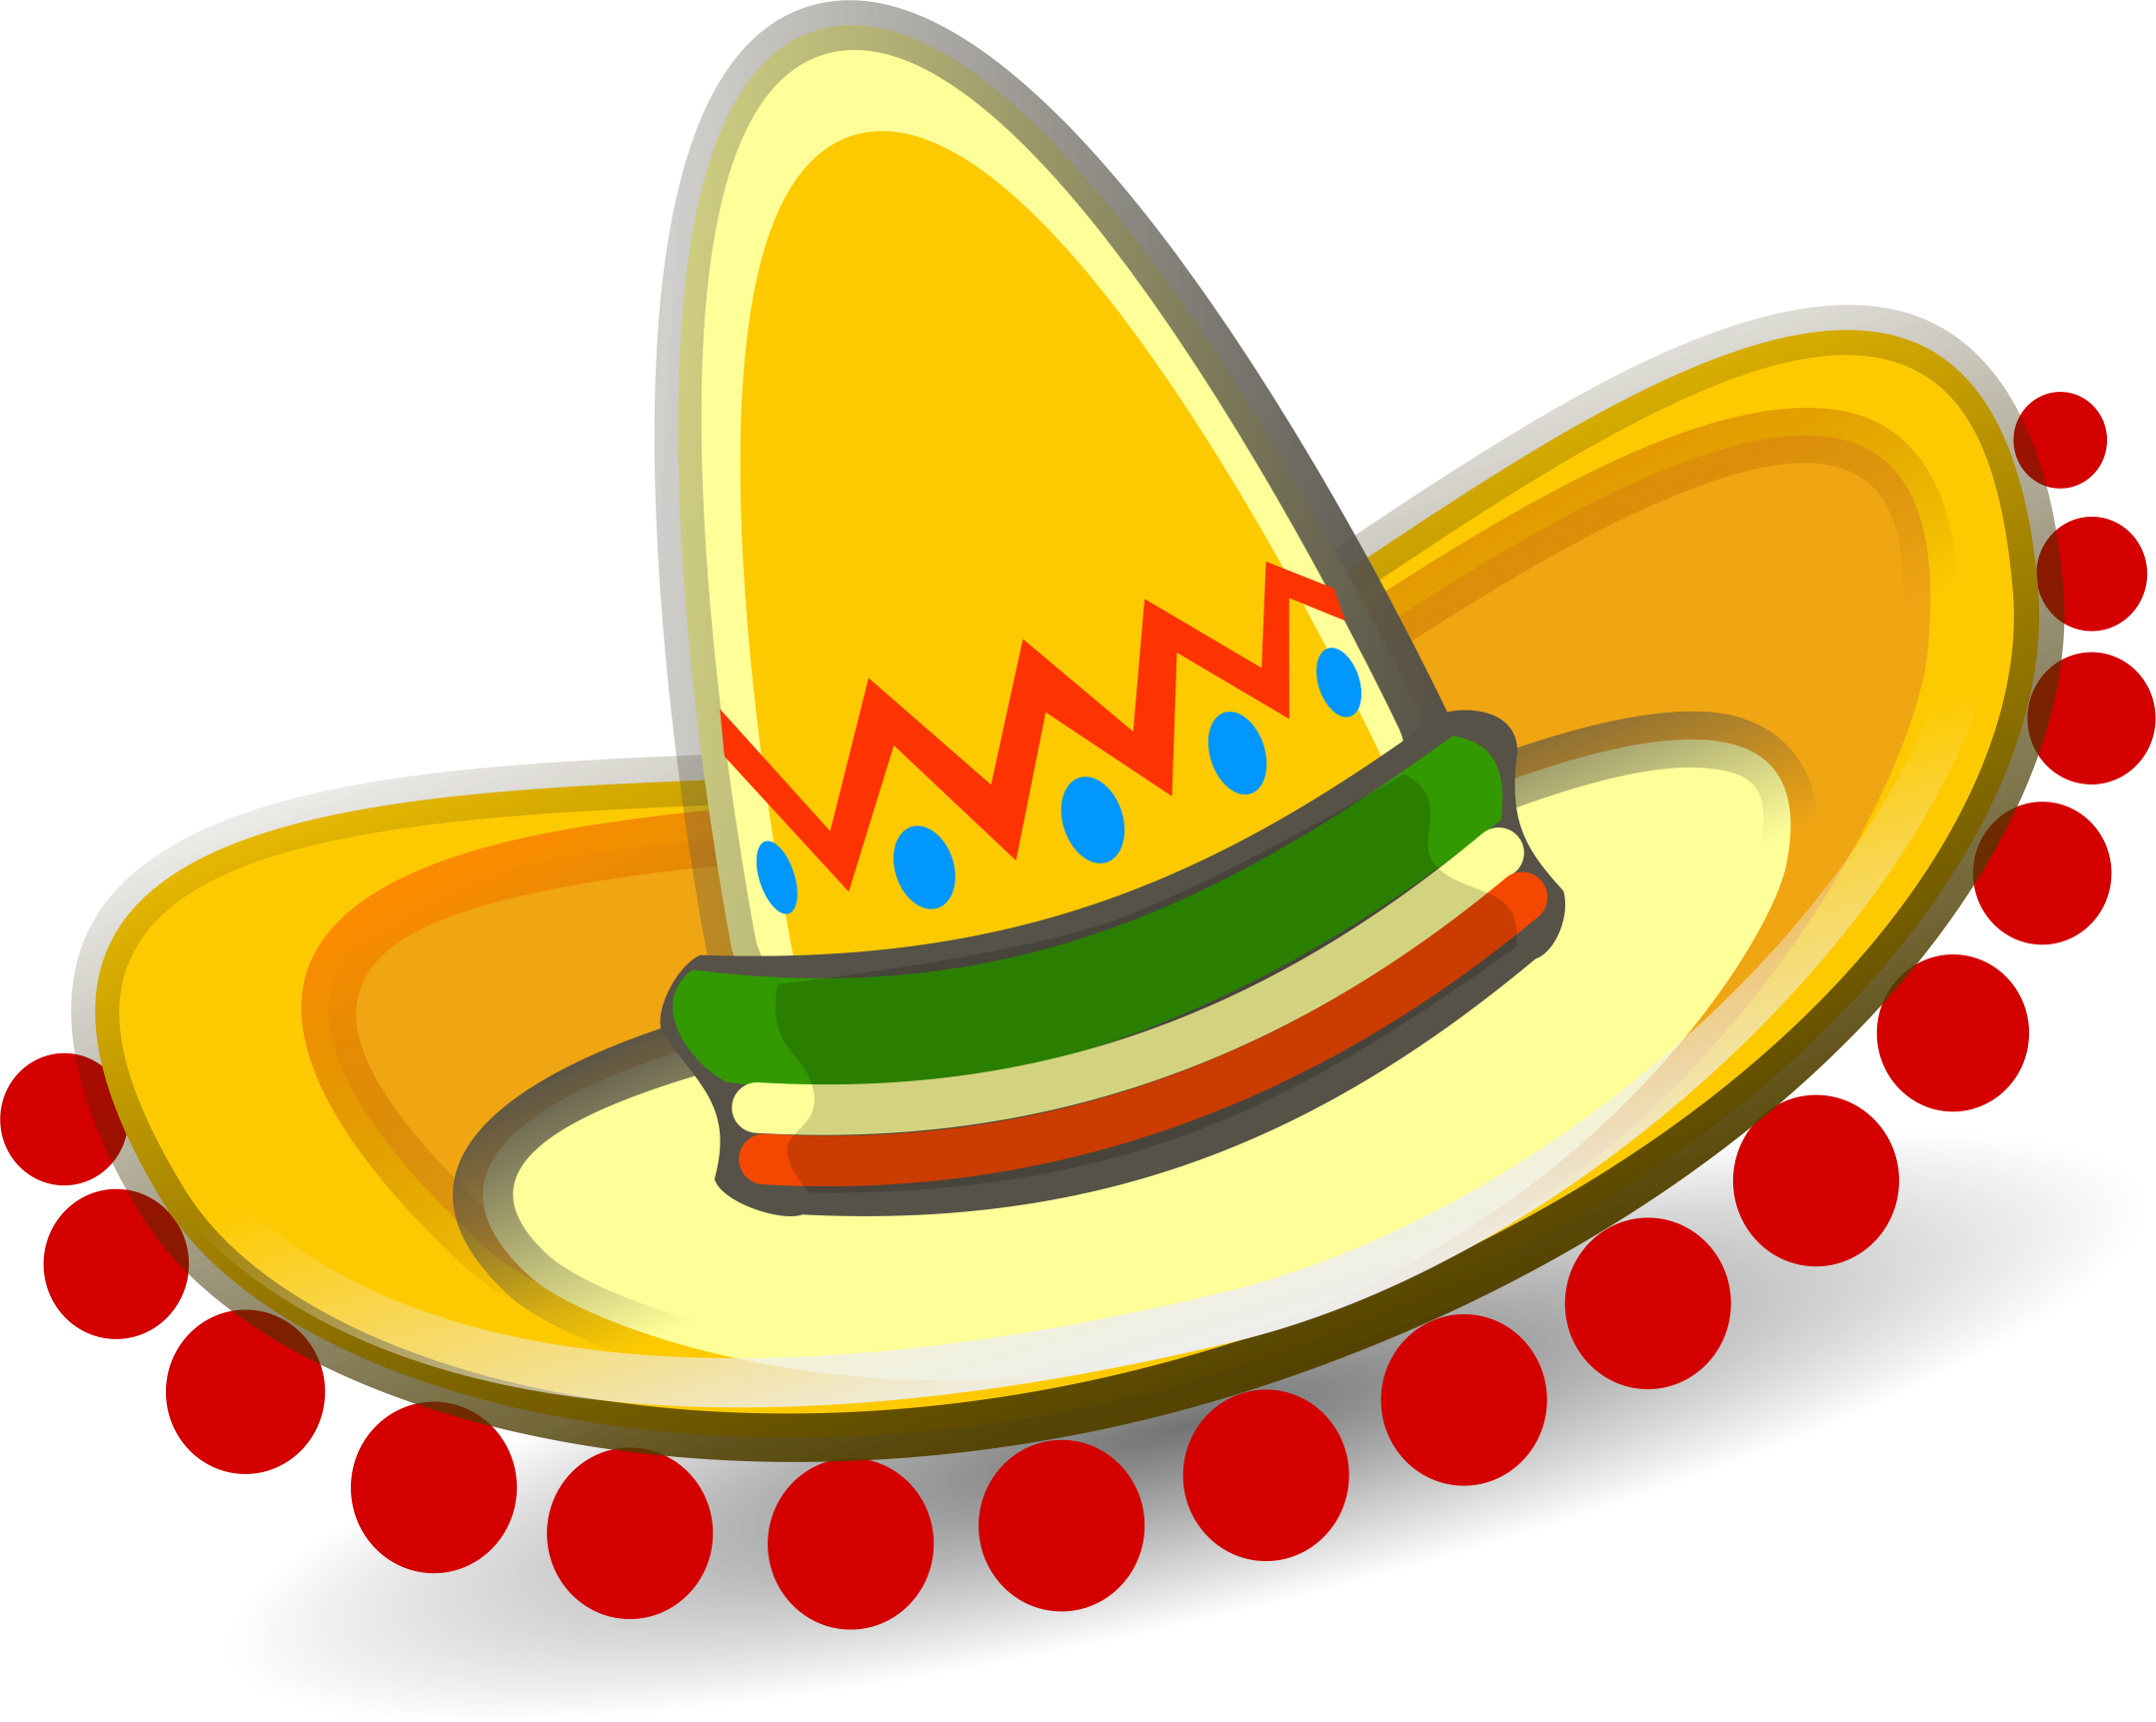 Maracas clipart poncho mexican. Pin by heather satterfield